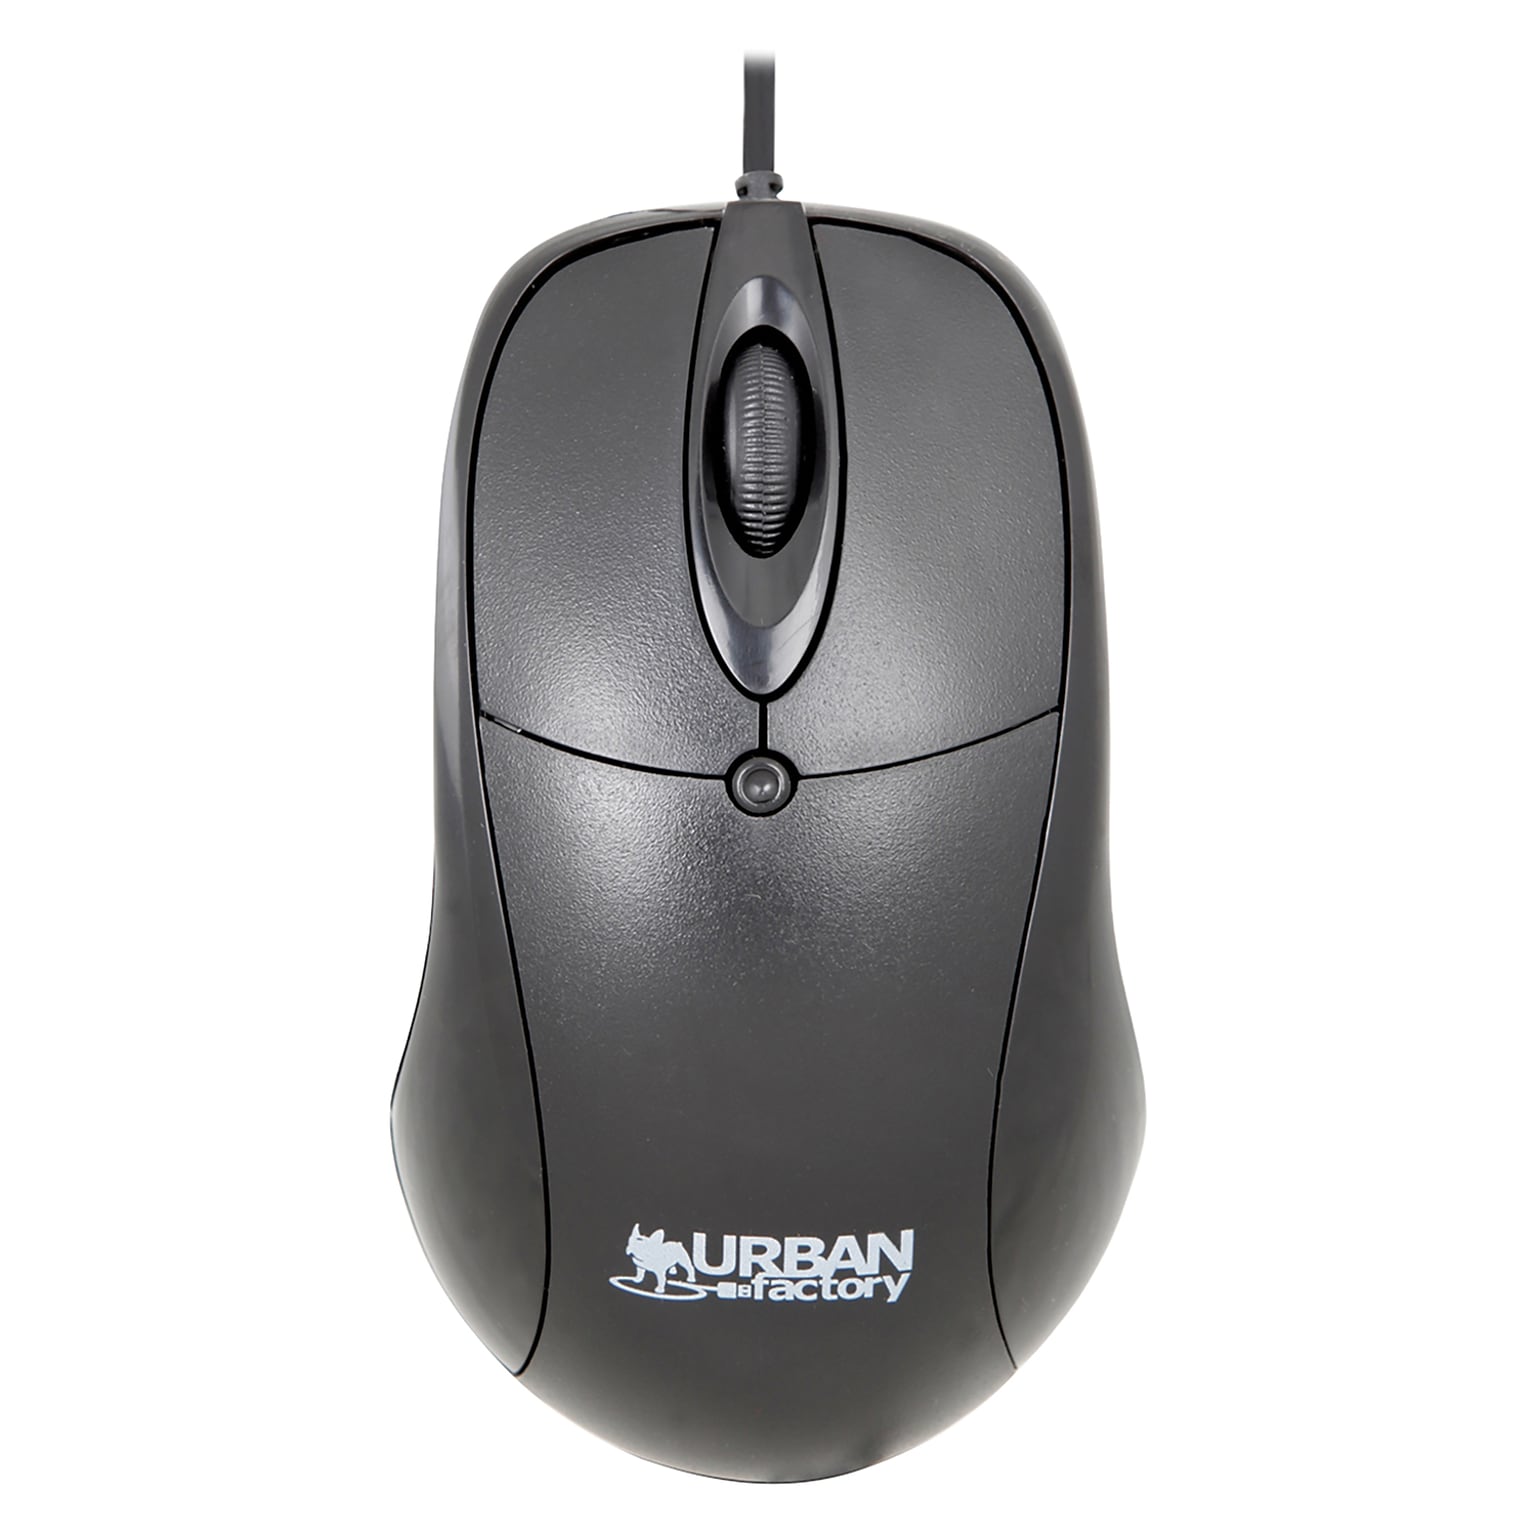 Urban Factory BIG CRAZY Wired Ambidextrous Optical USB Mouse, Black (BCM01UF)